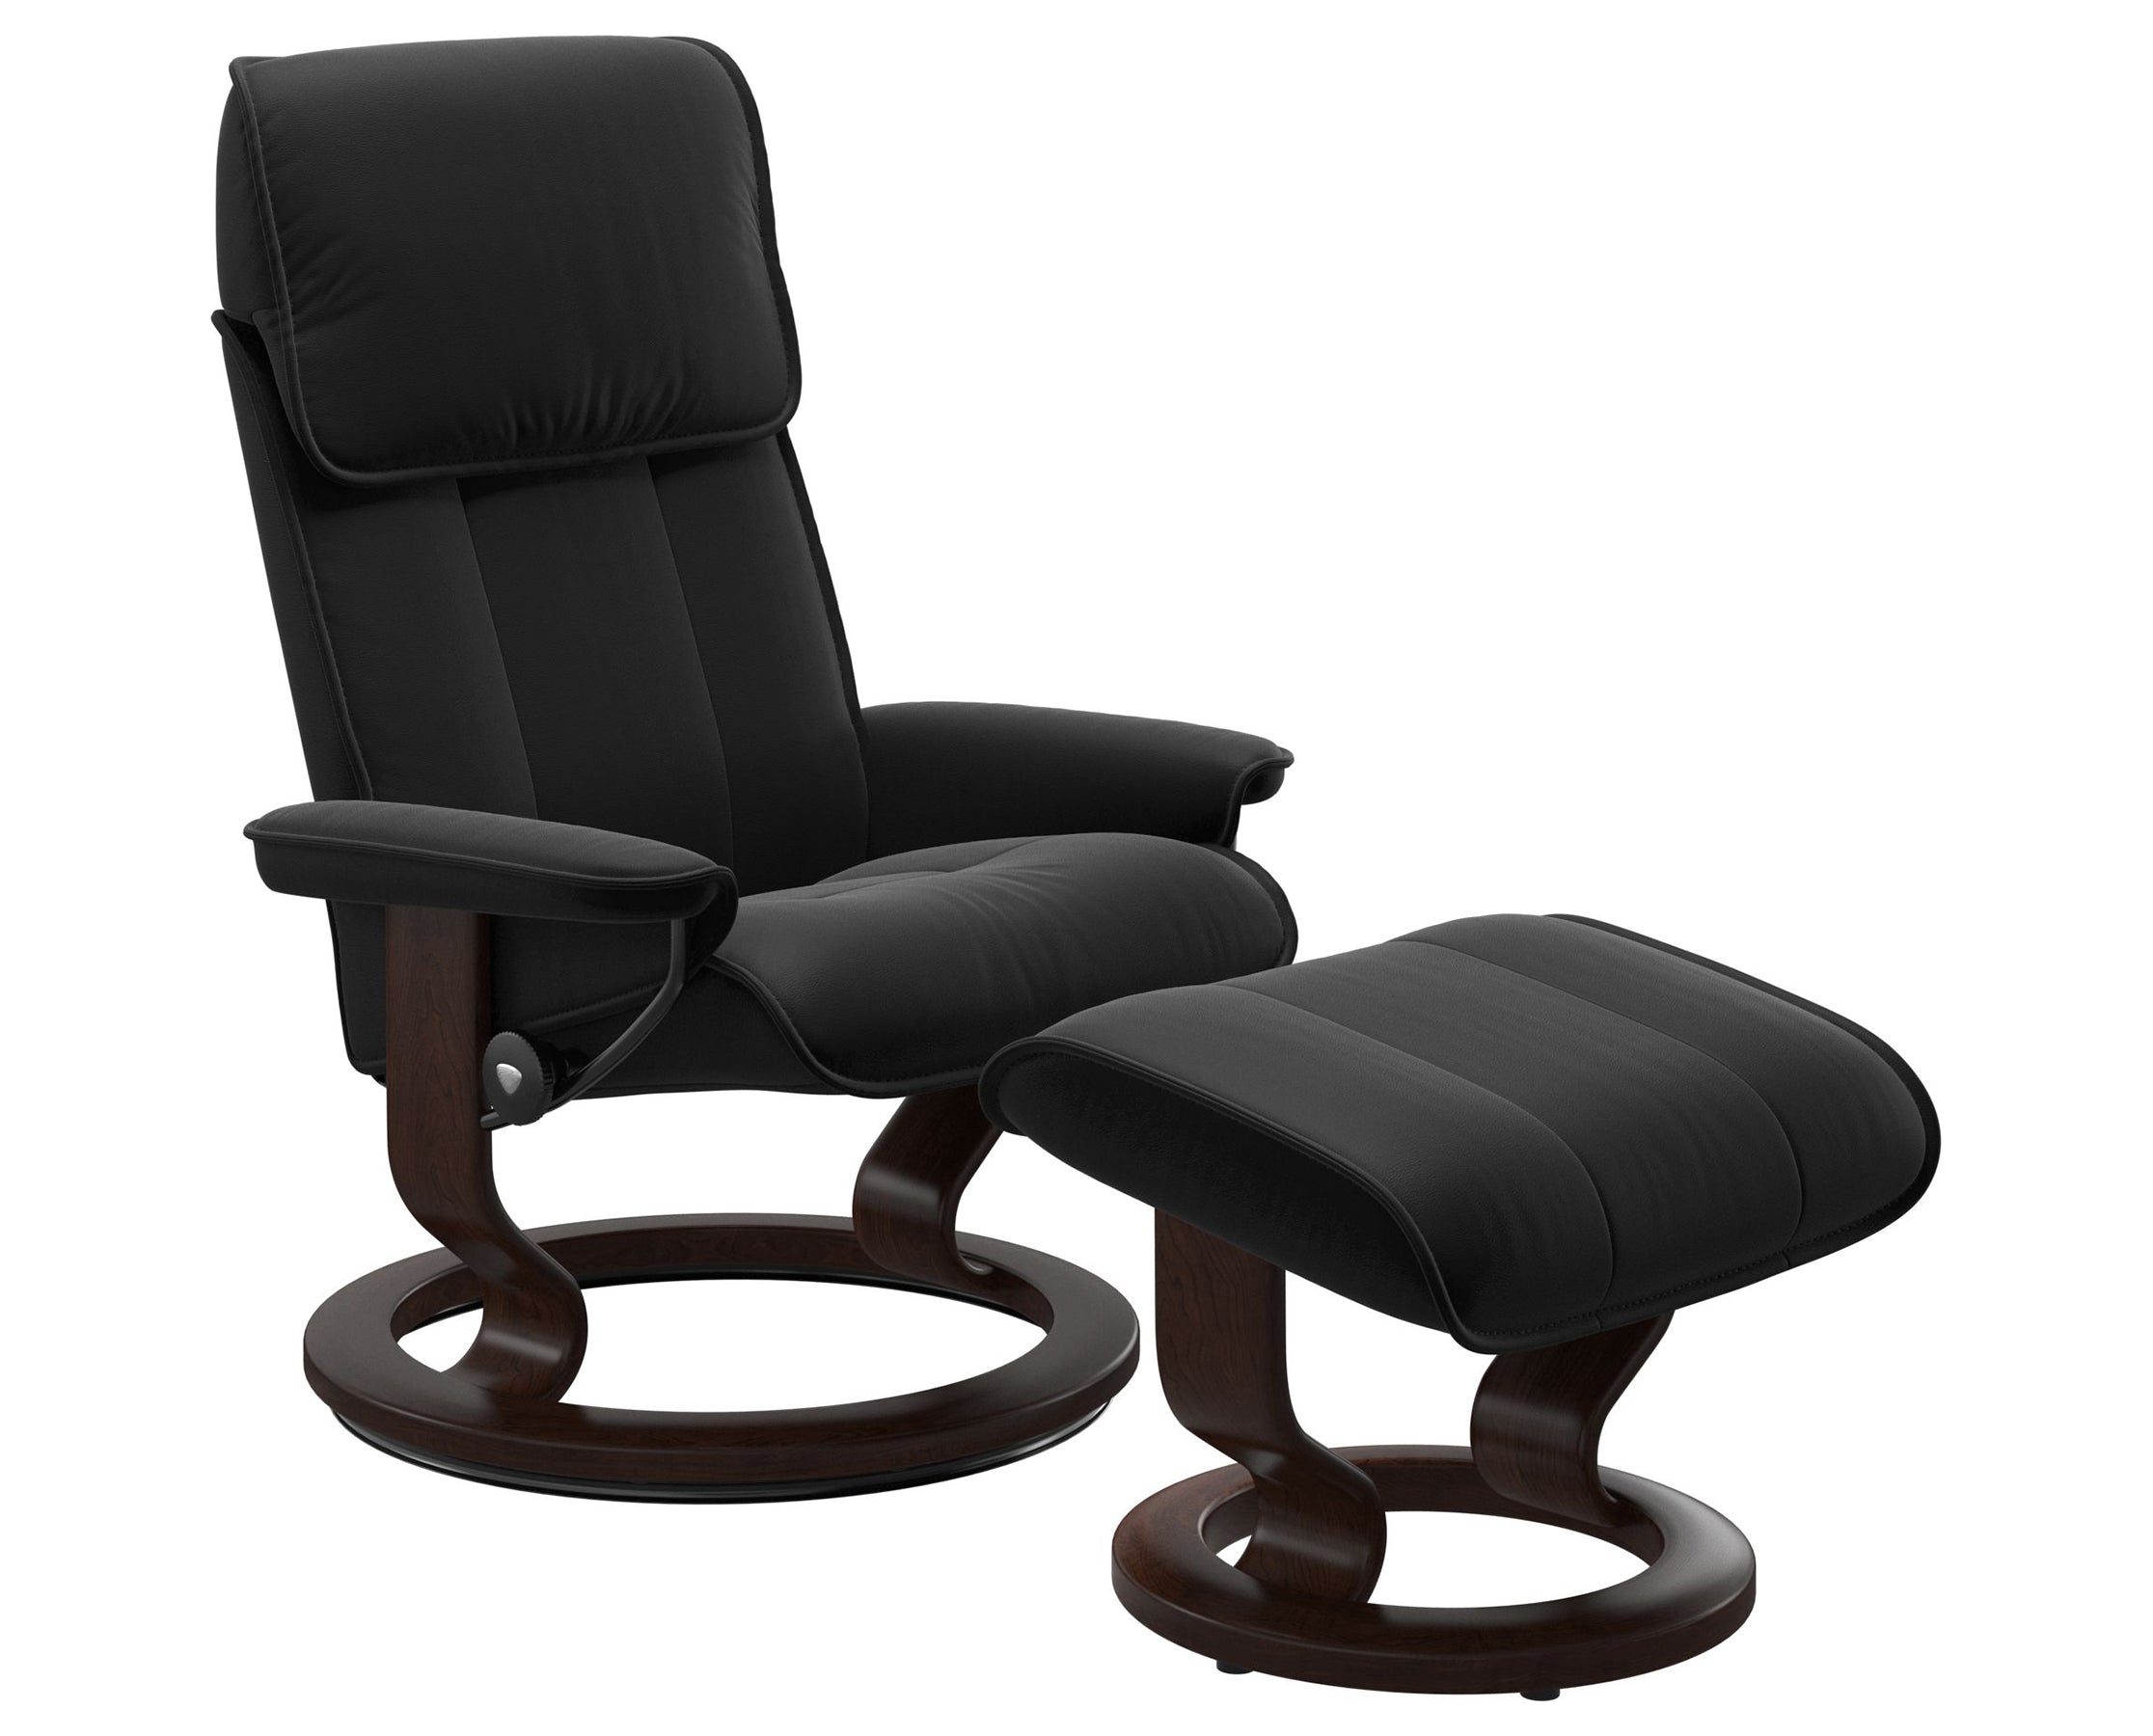 Paloma Leather Black M/L and Brown Base | Stressless Admiral Classic Recliner | Valley Ridge Furniture